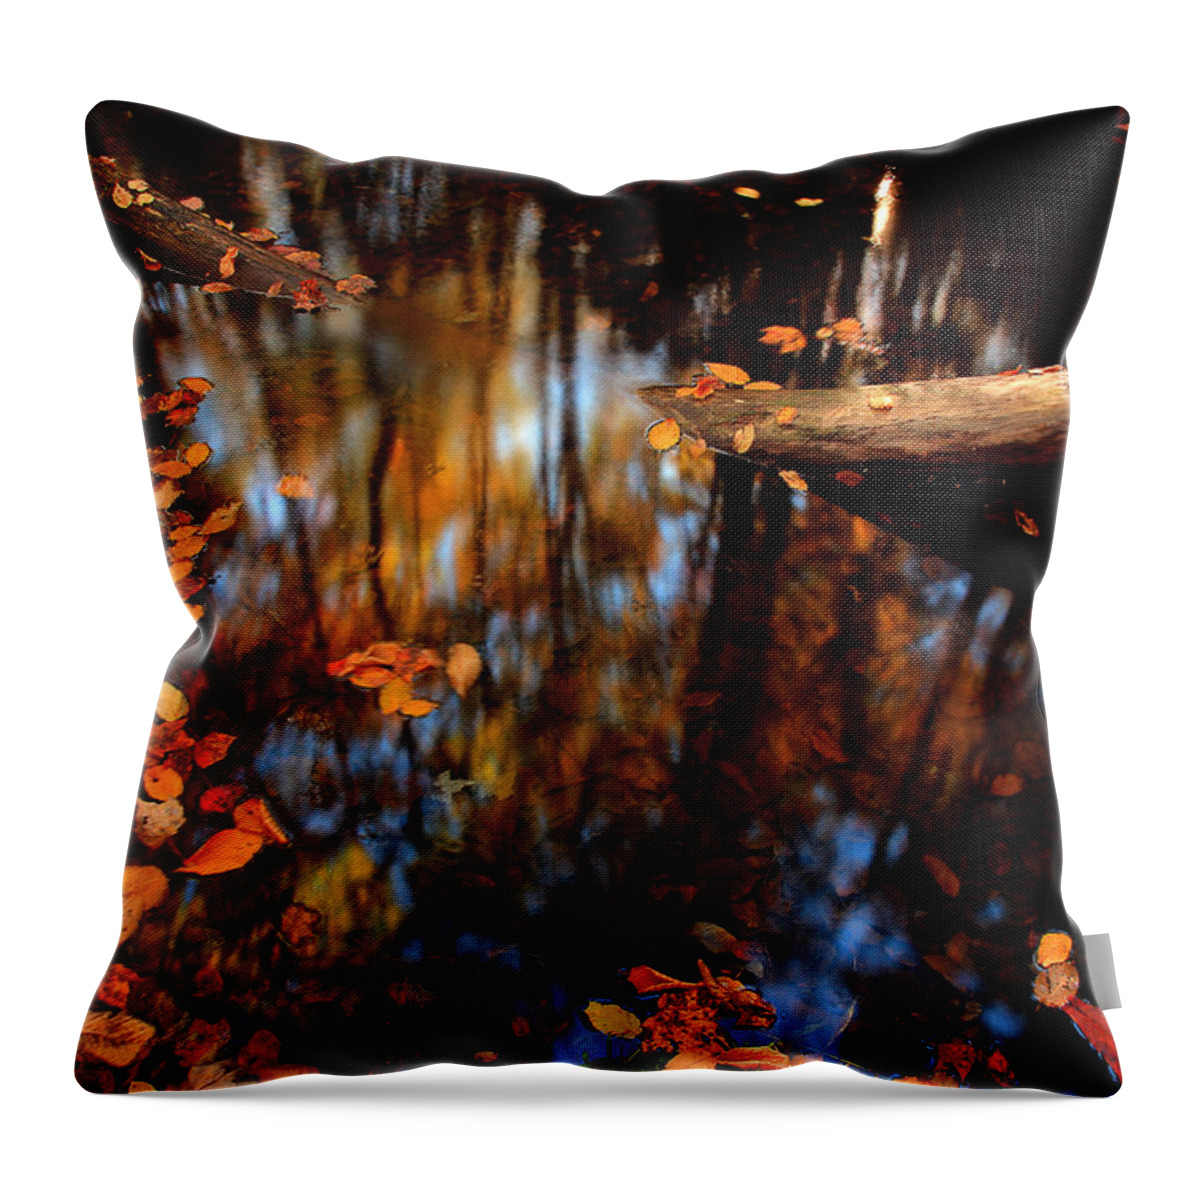 River Scene Throw Pillow featuring the photograph Edge Of Wishes by Mike Eingle